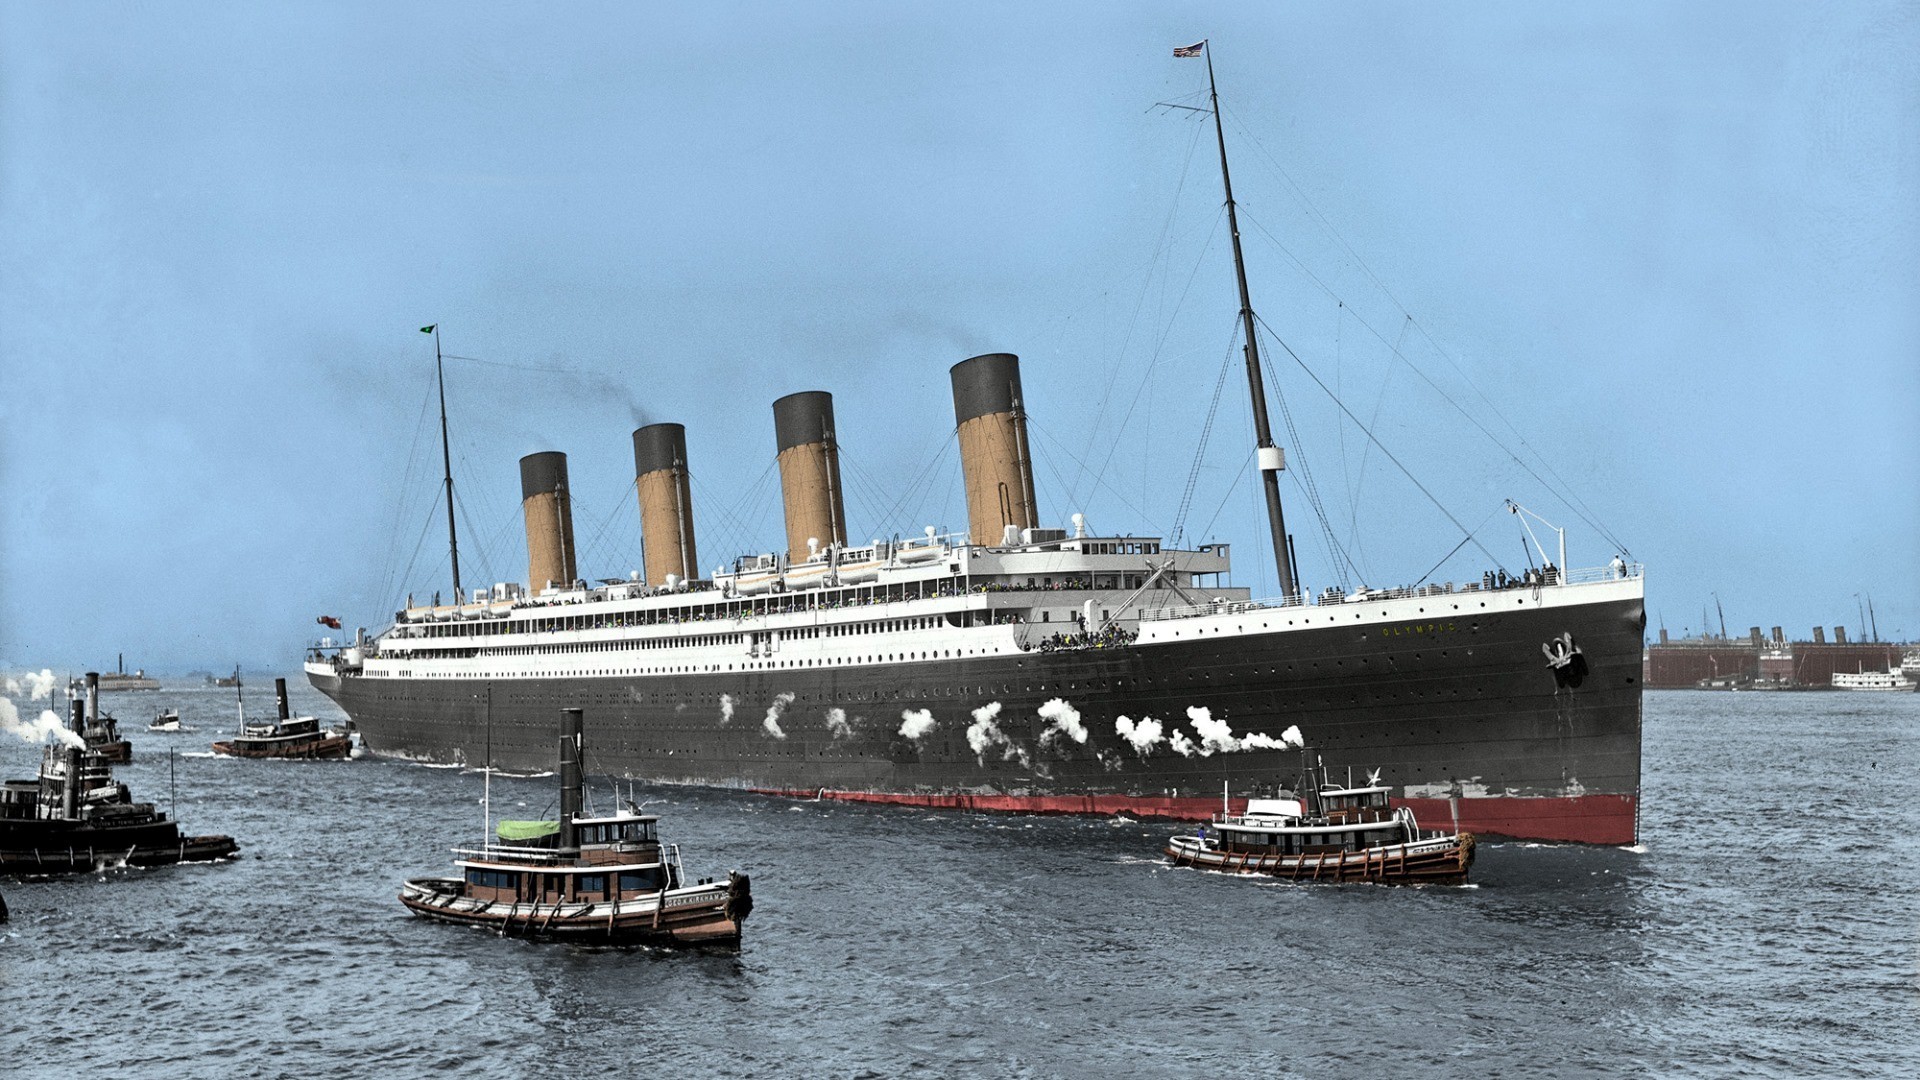 nature, Landscape, Ship, Boat, Sea, Chimneys, Smoke, History, RMS Olympic, Steamship, UK, Colorized Photos, Dock, Crowds Wallpaper